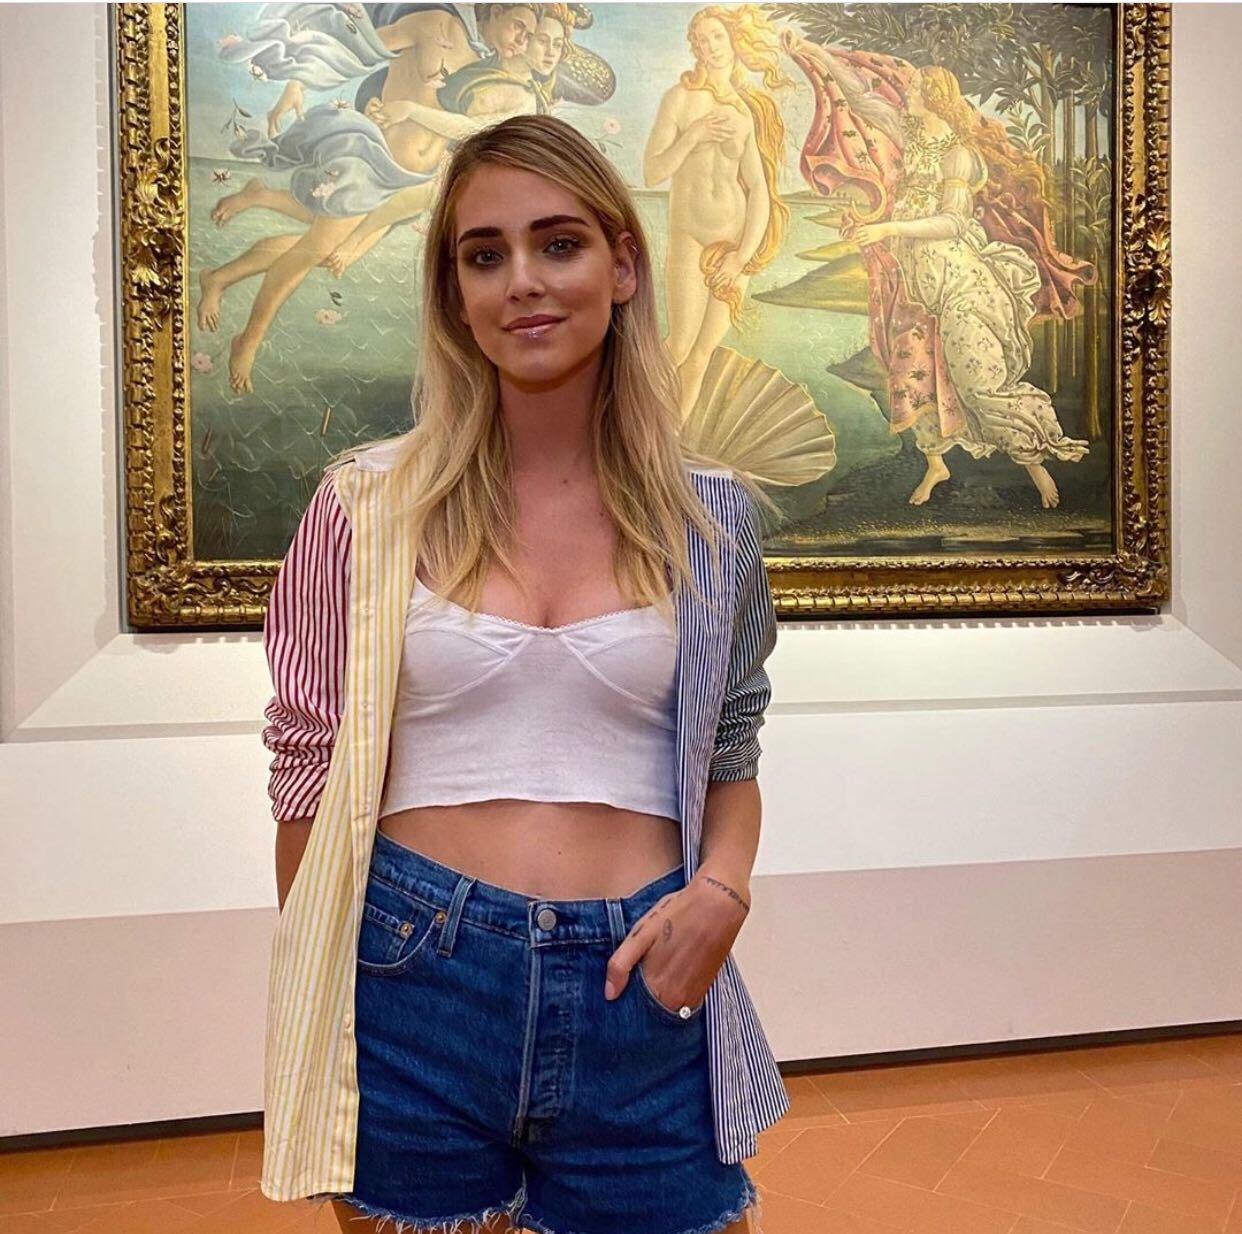 Art Industry News: Florence's Uffizi Gallery Is Under Fire for Comparing a  Pretty Instagram Influencer to Botticelli's 'Venus' + Other News